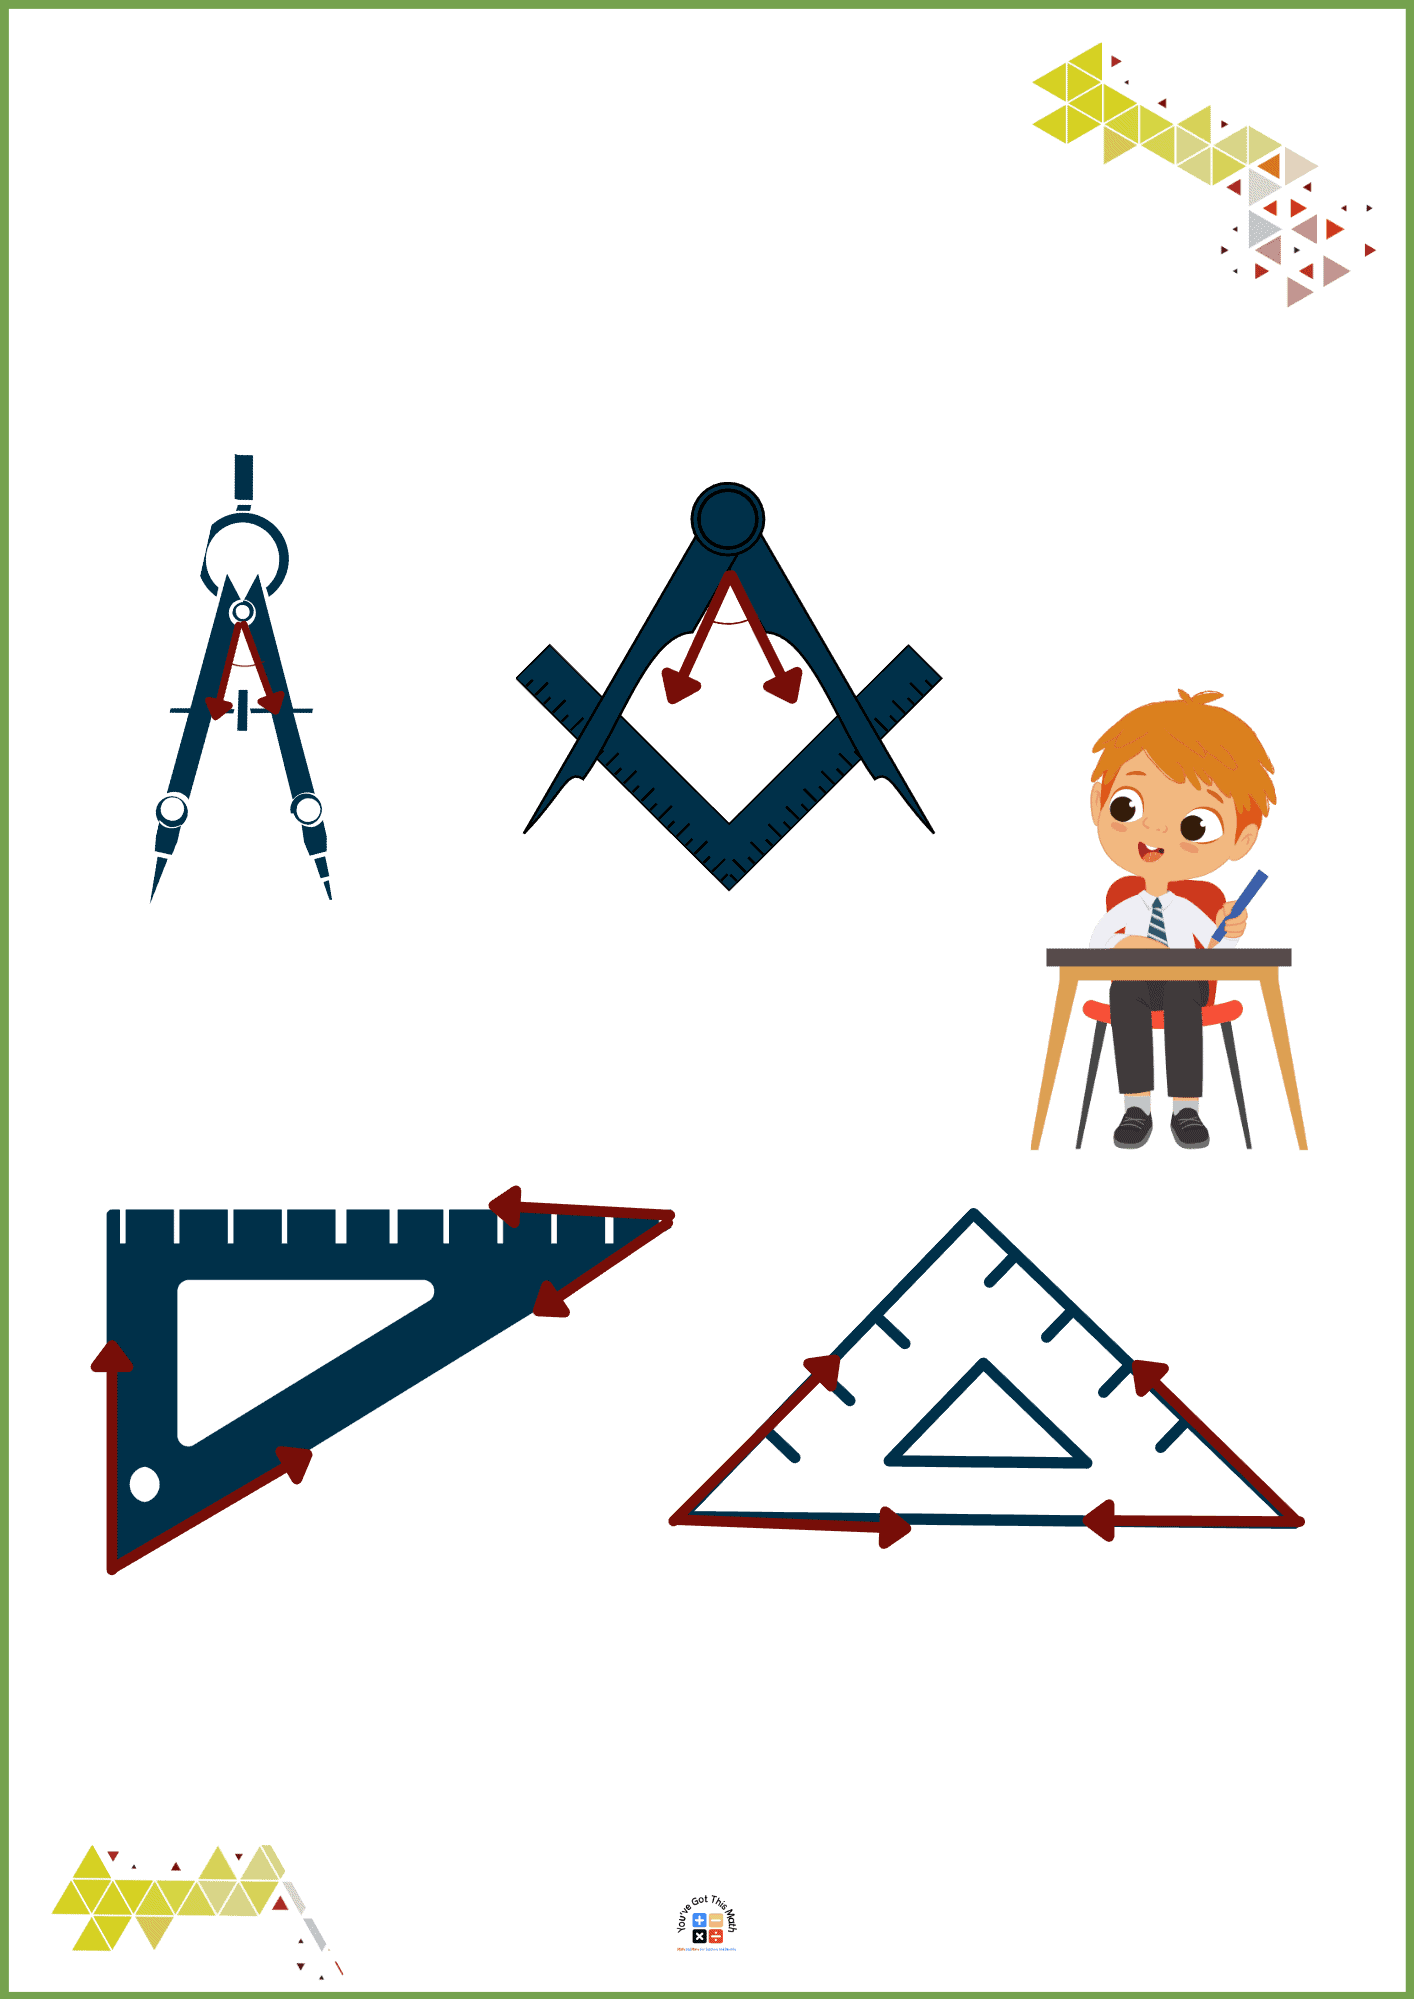 Set Square and Compasses in Acute Angle Shape